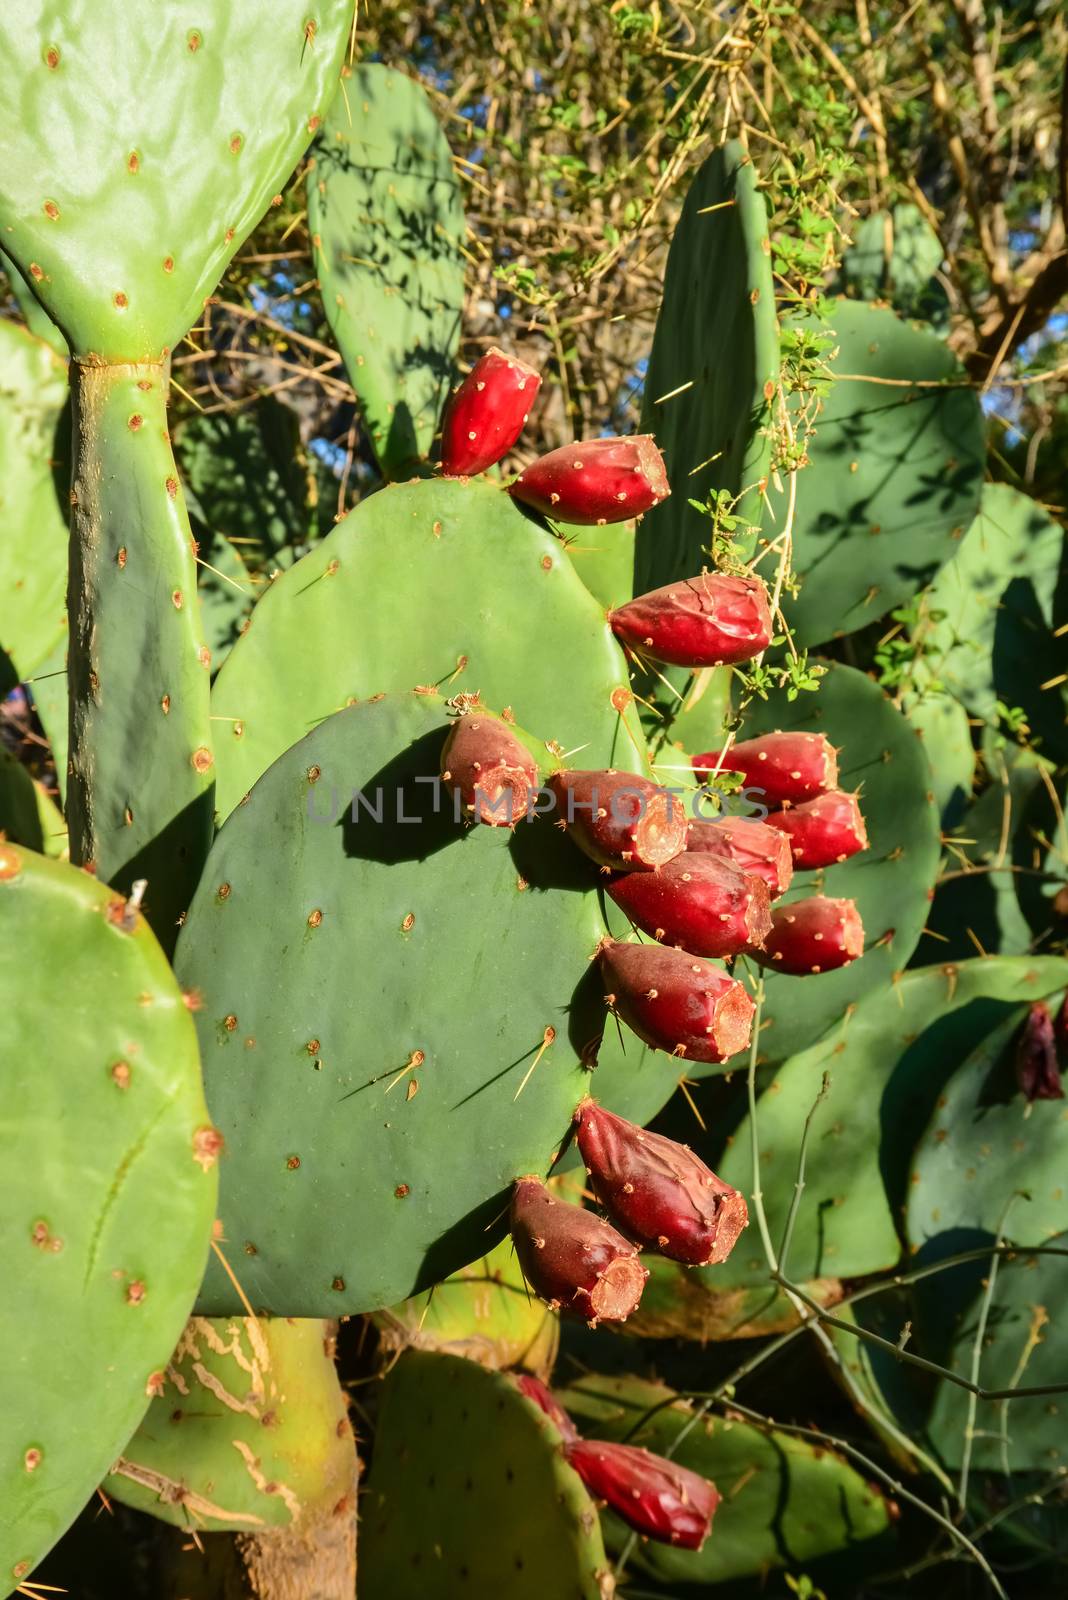 Red fruits with seeds, Cactus Opuntia sp. in the Phoenix Botanical Garden, Arizona, USA